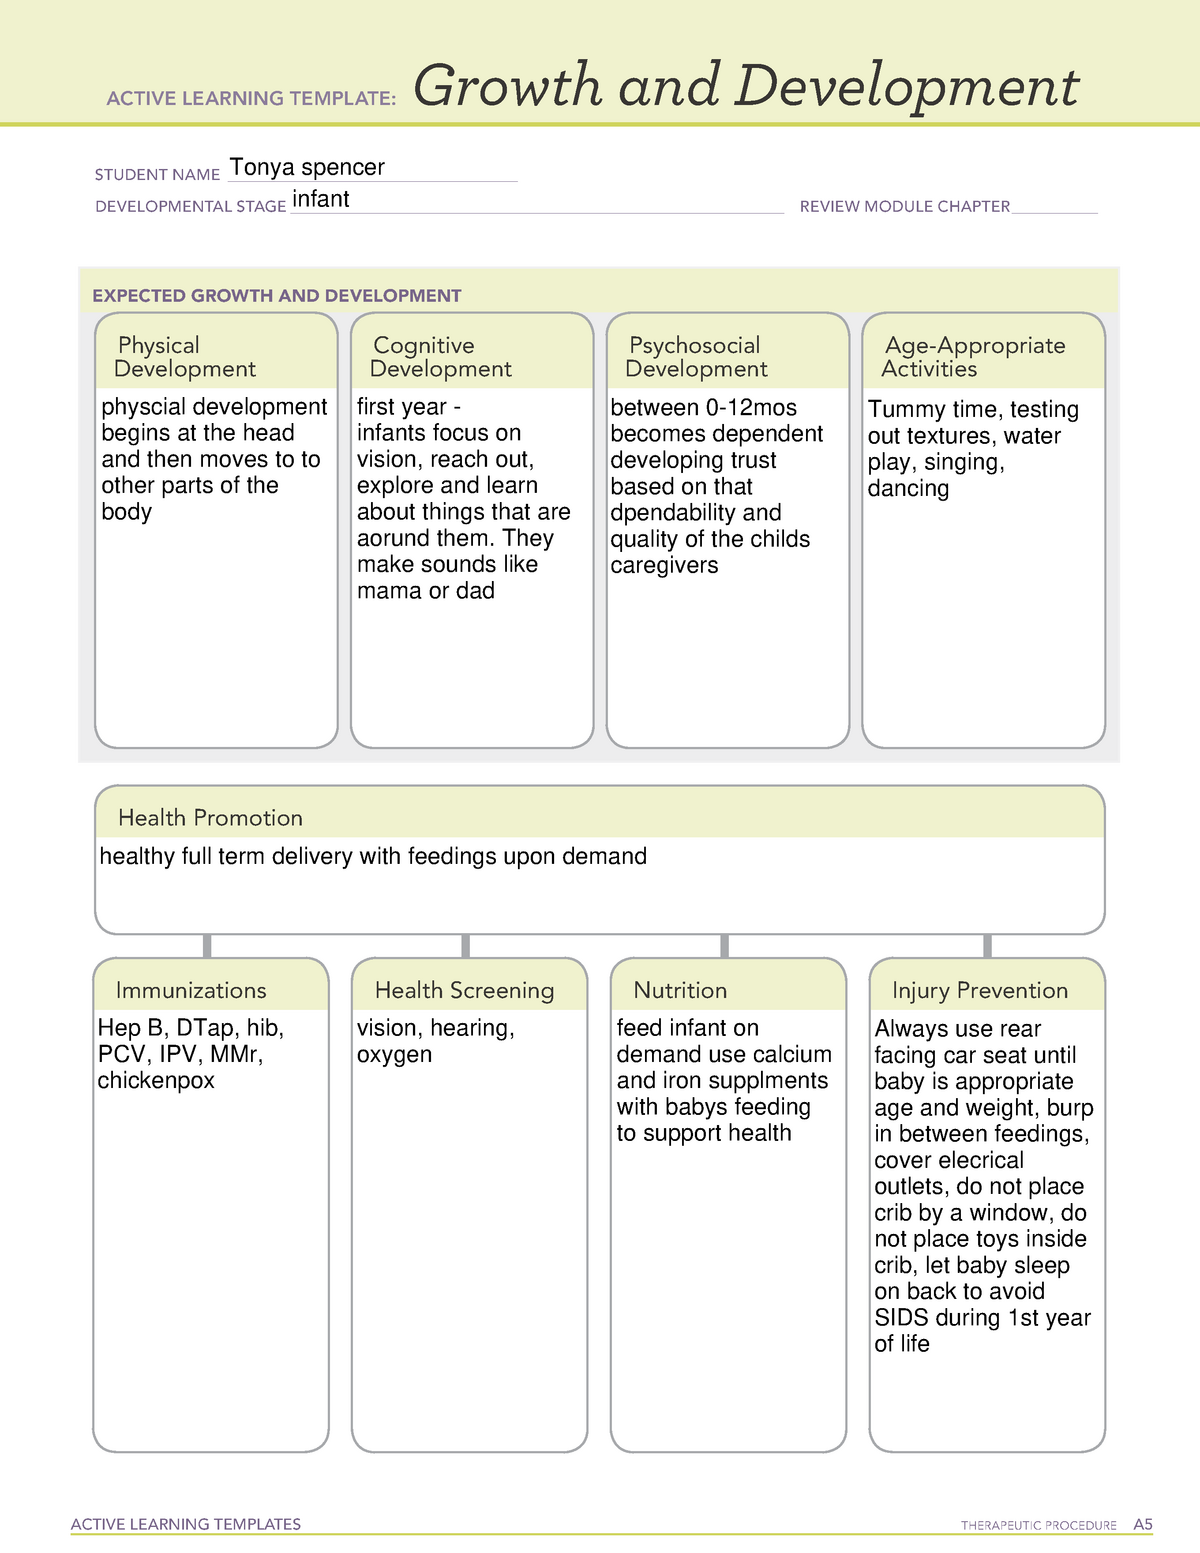 infant-assessment-ati-template-for-misc-online-coursework-active